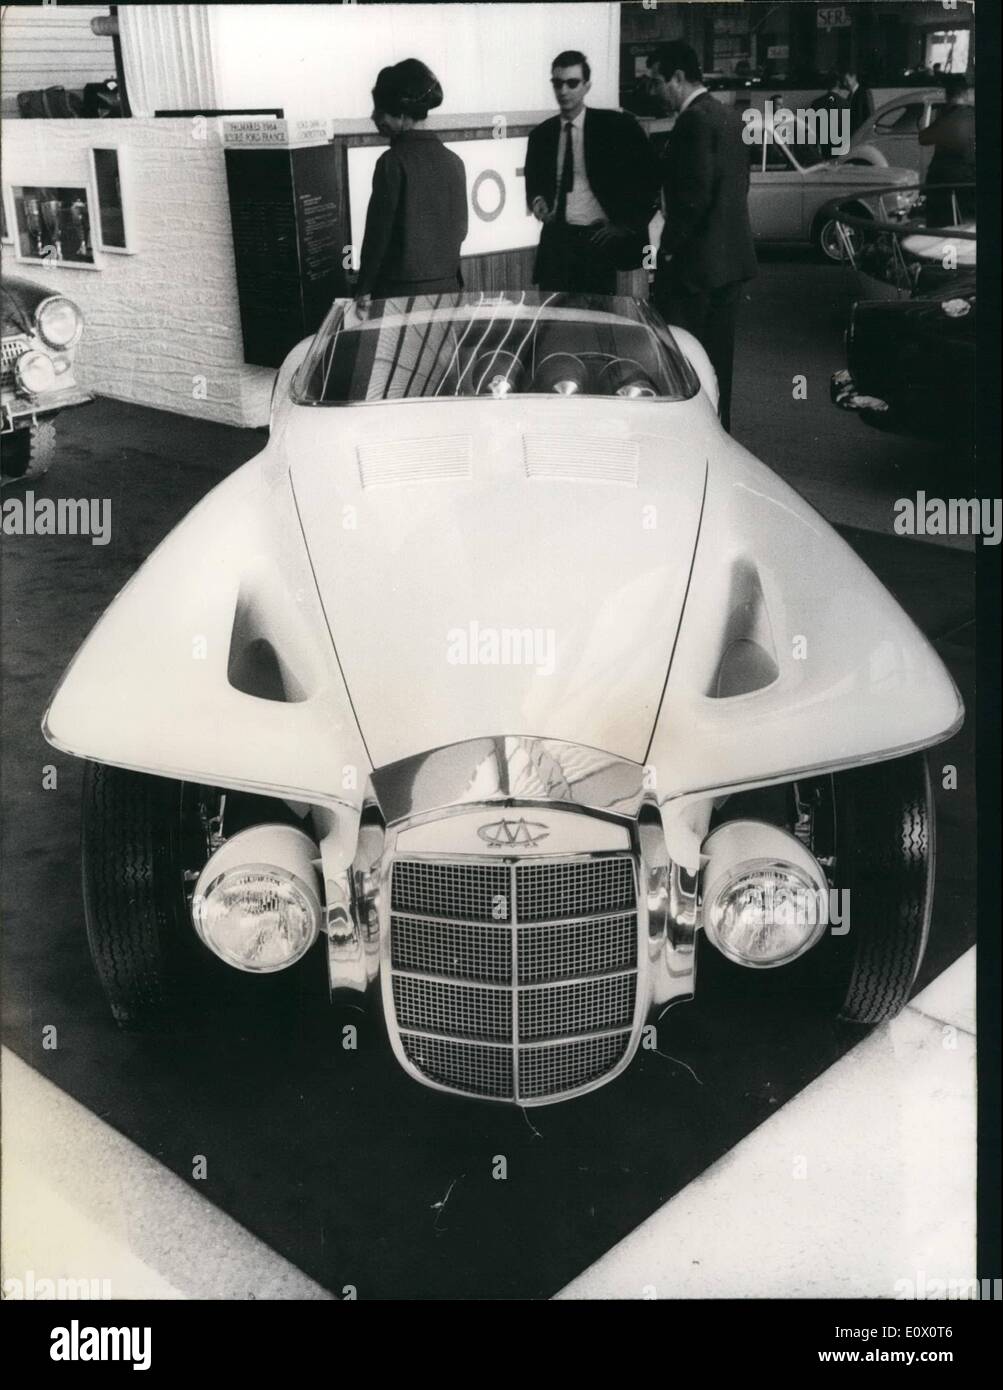 Oct. 10, 1964 - Paris Motor Show Opens: Photo Shows A Mercer Cobra, a new car which is nothing Else than a Replica of an old Mercer back to 1911. The Body of this unusual car was built by a tornio specialist. Stock Photo